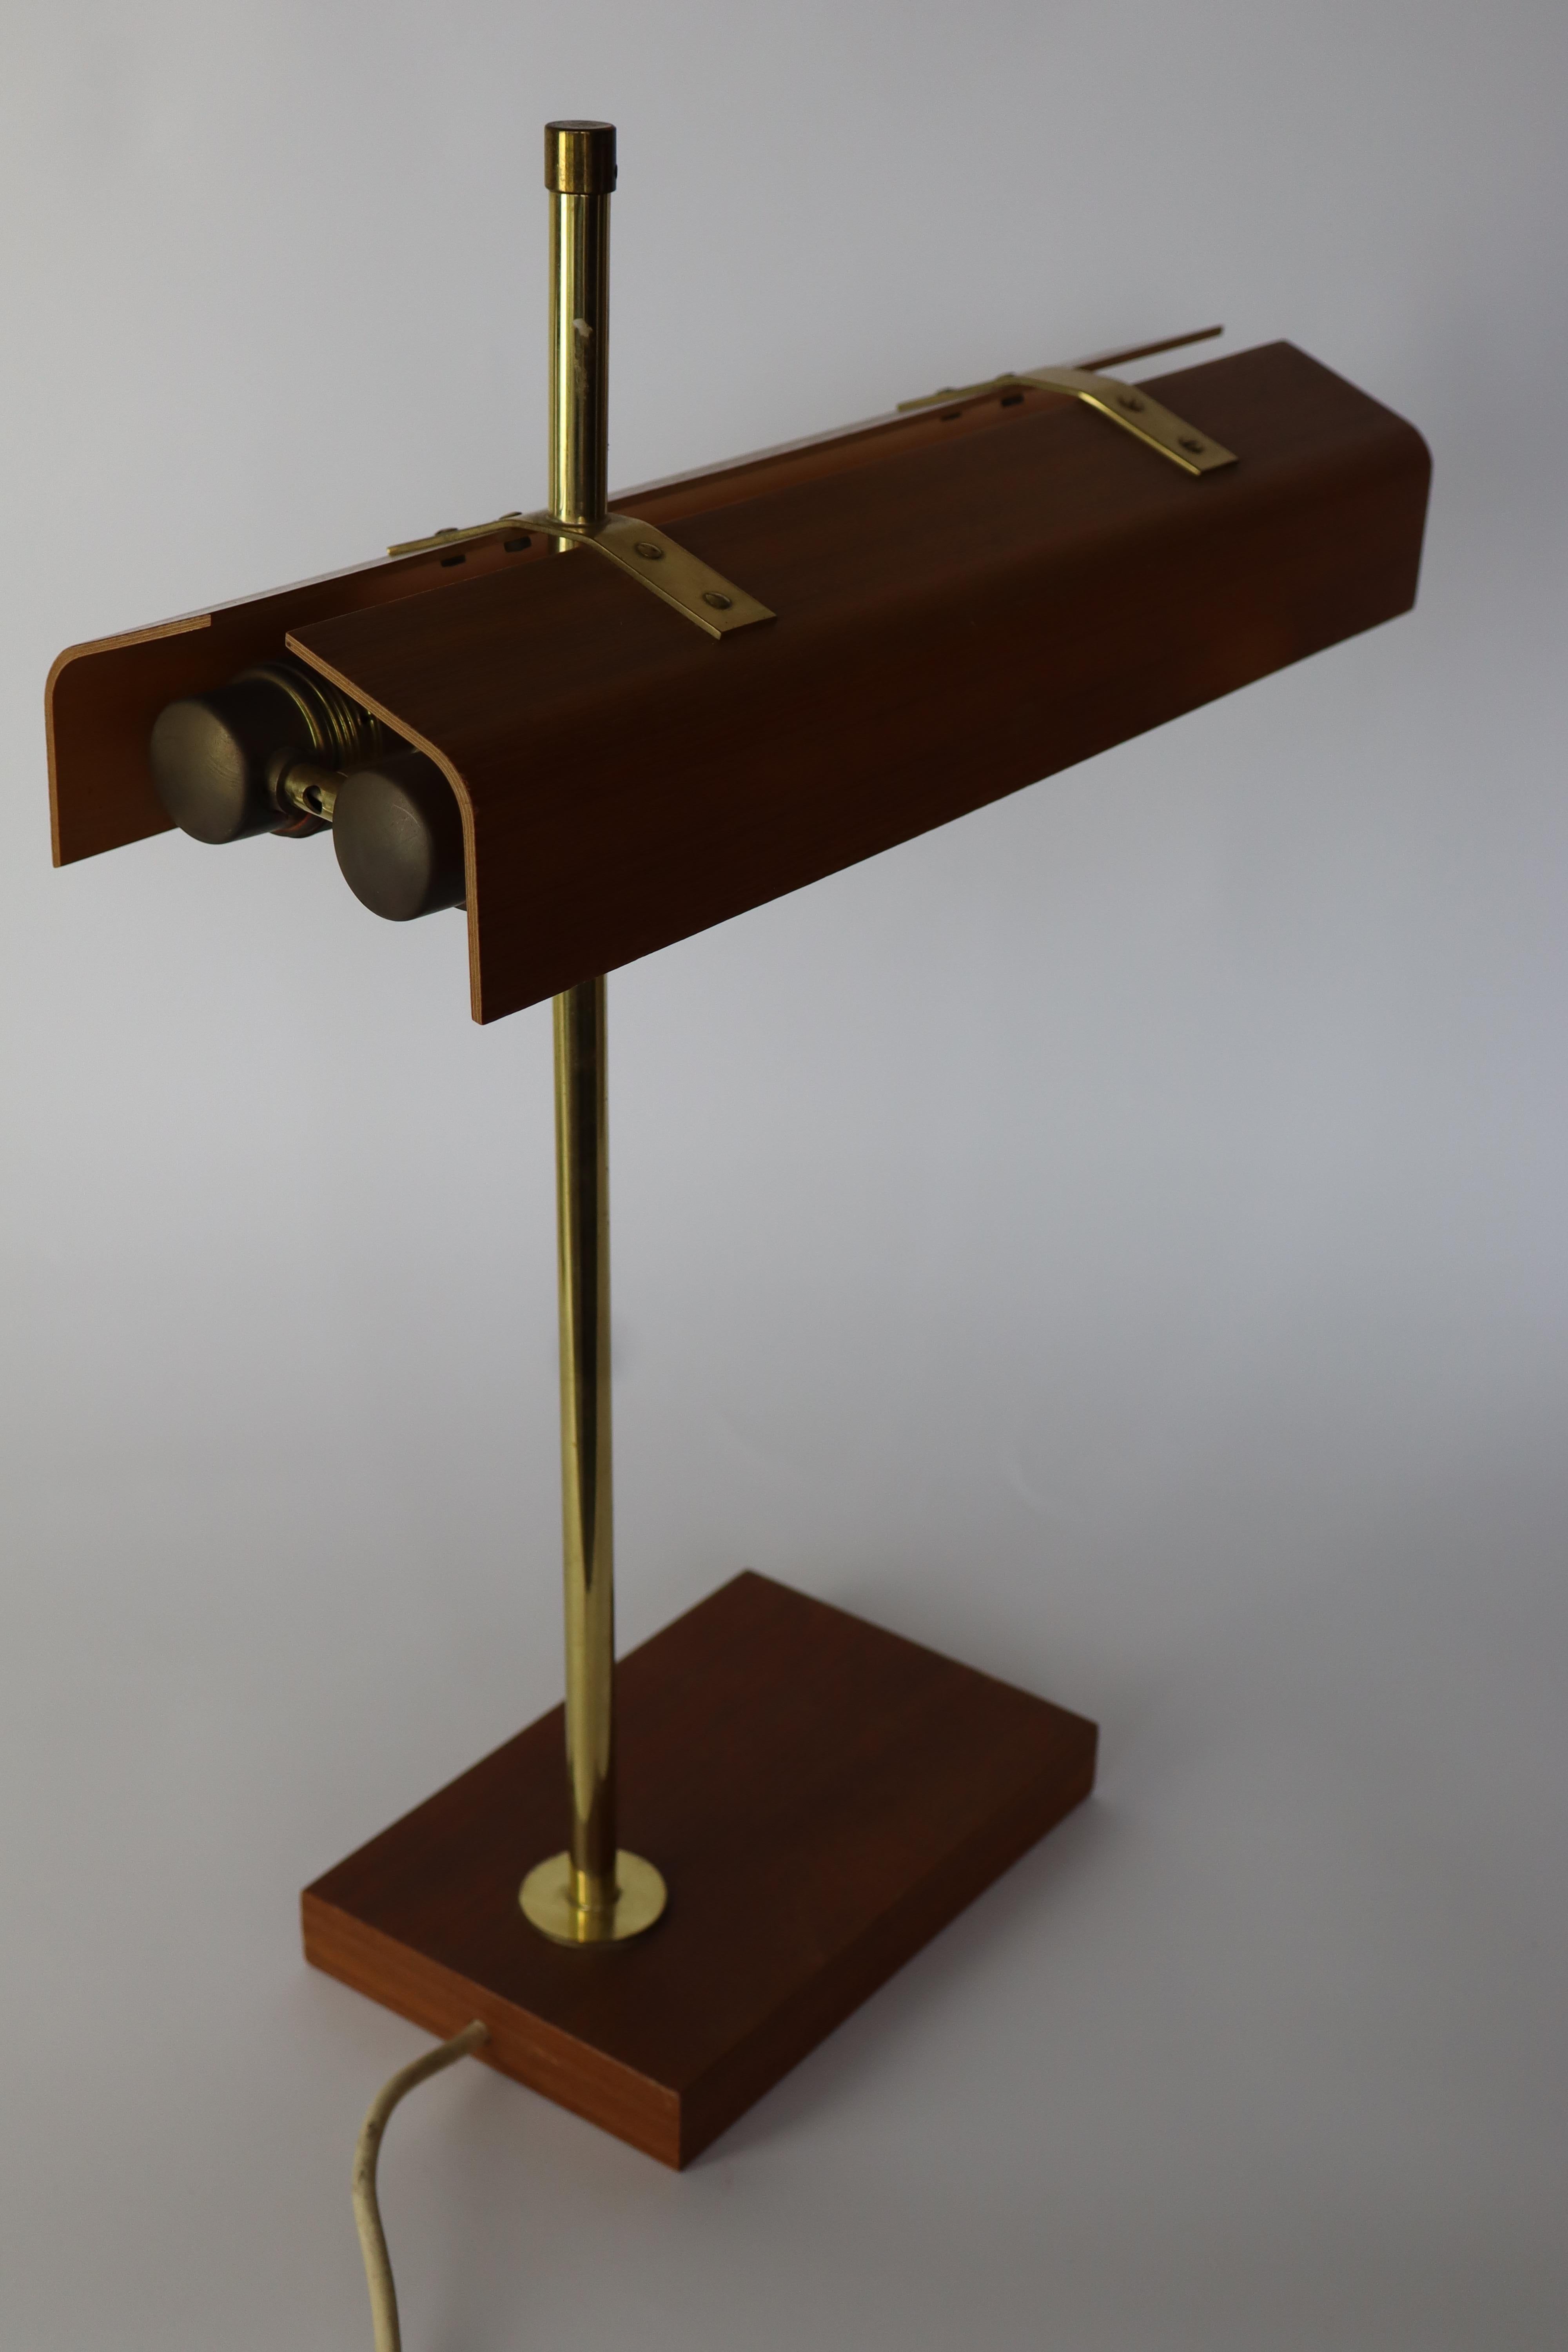 1960's desk or tablelamp in plywood and brass.
Very similar to the German Kaiser leuchten desklamps in teakwood.

Foot is made in teakwood
Shade is made out of teak-plywood.
Very fine quality with nice brass details: for example, the visible screws